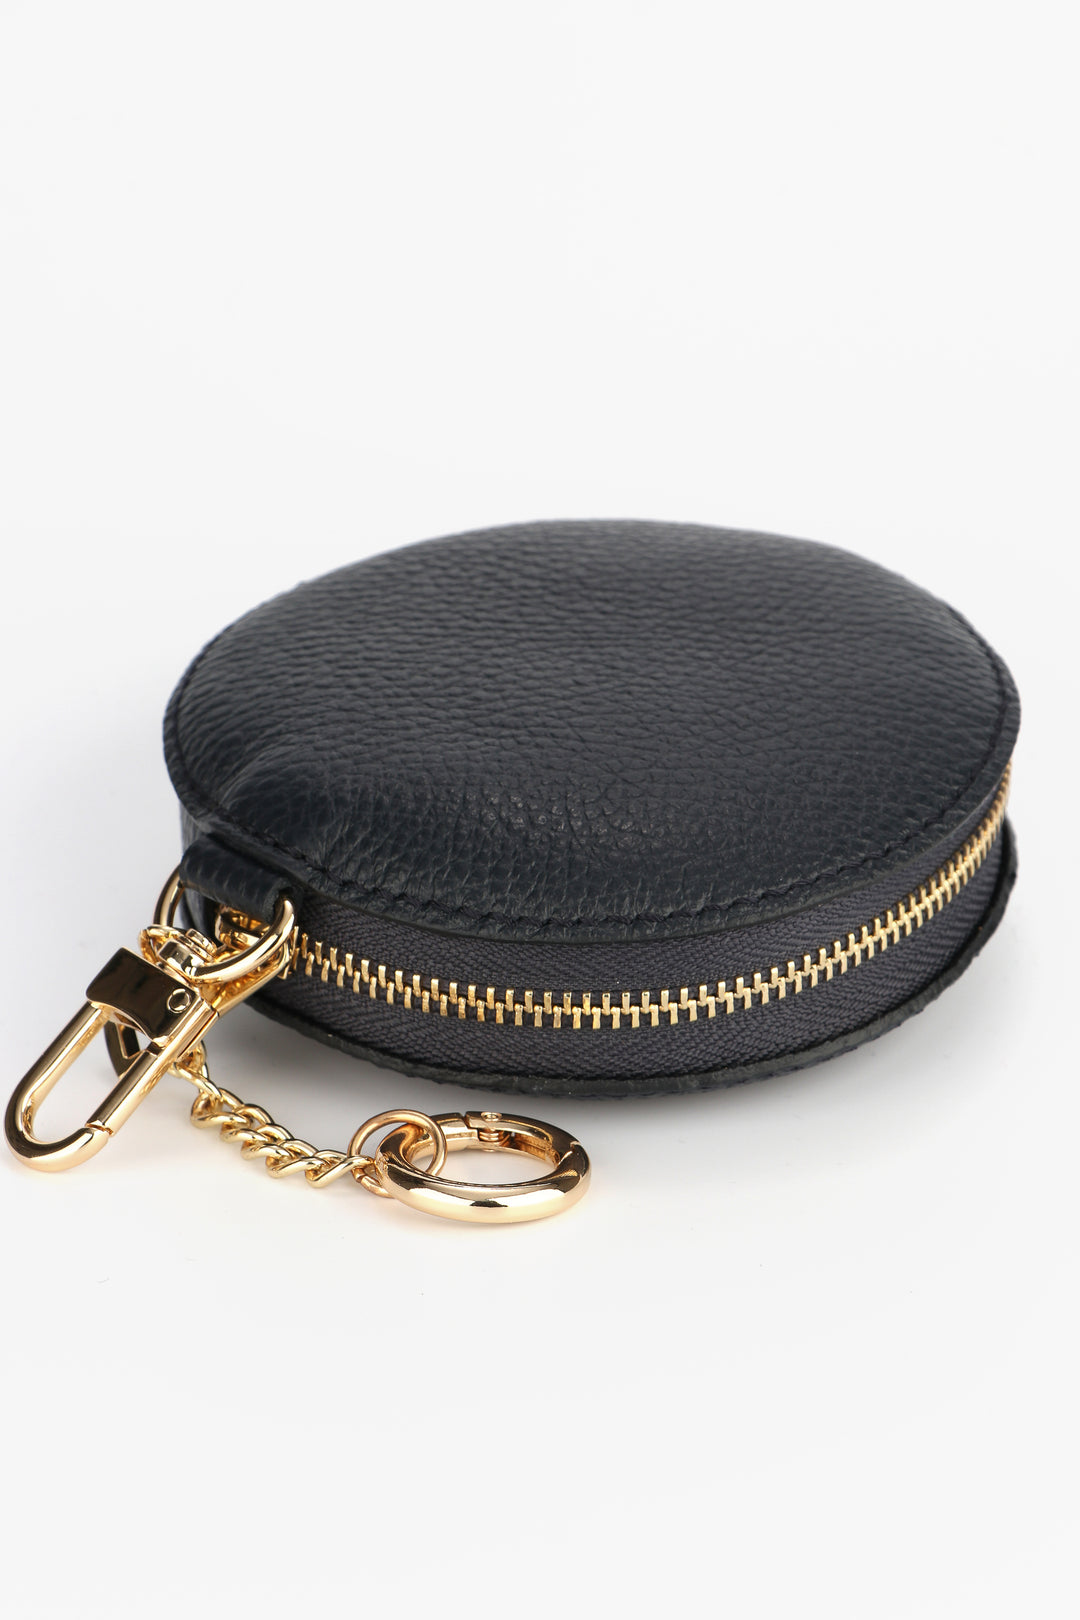 close up of the gold zip closure and clip on keyring attachments of the black leather coin purse